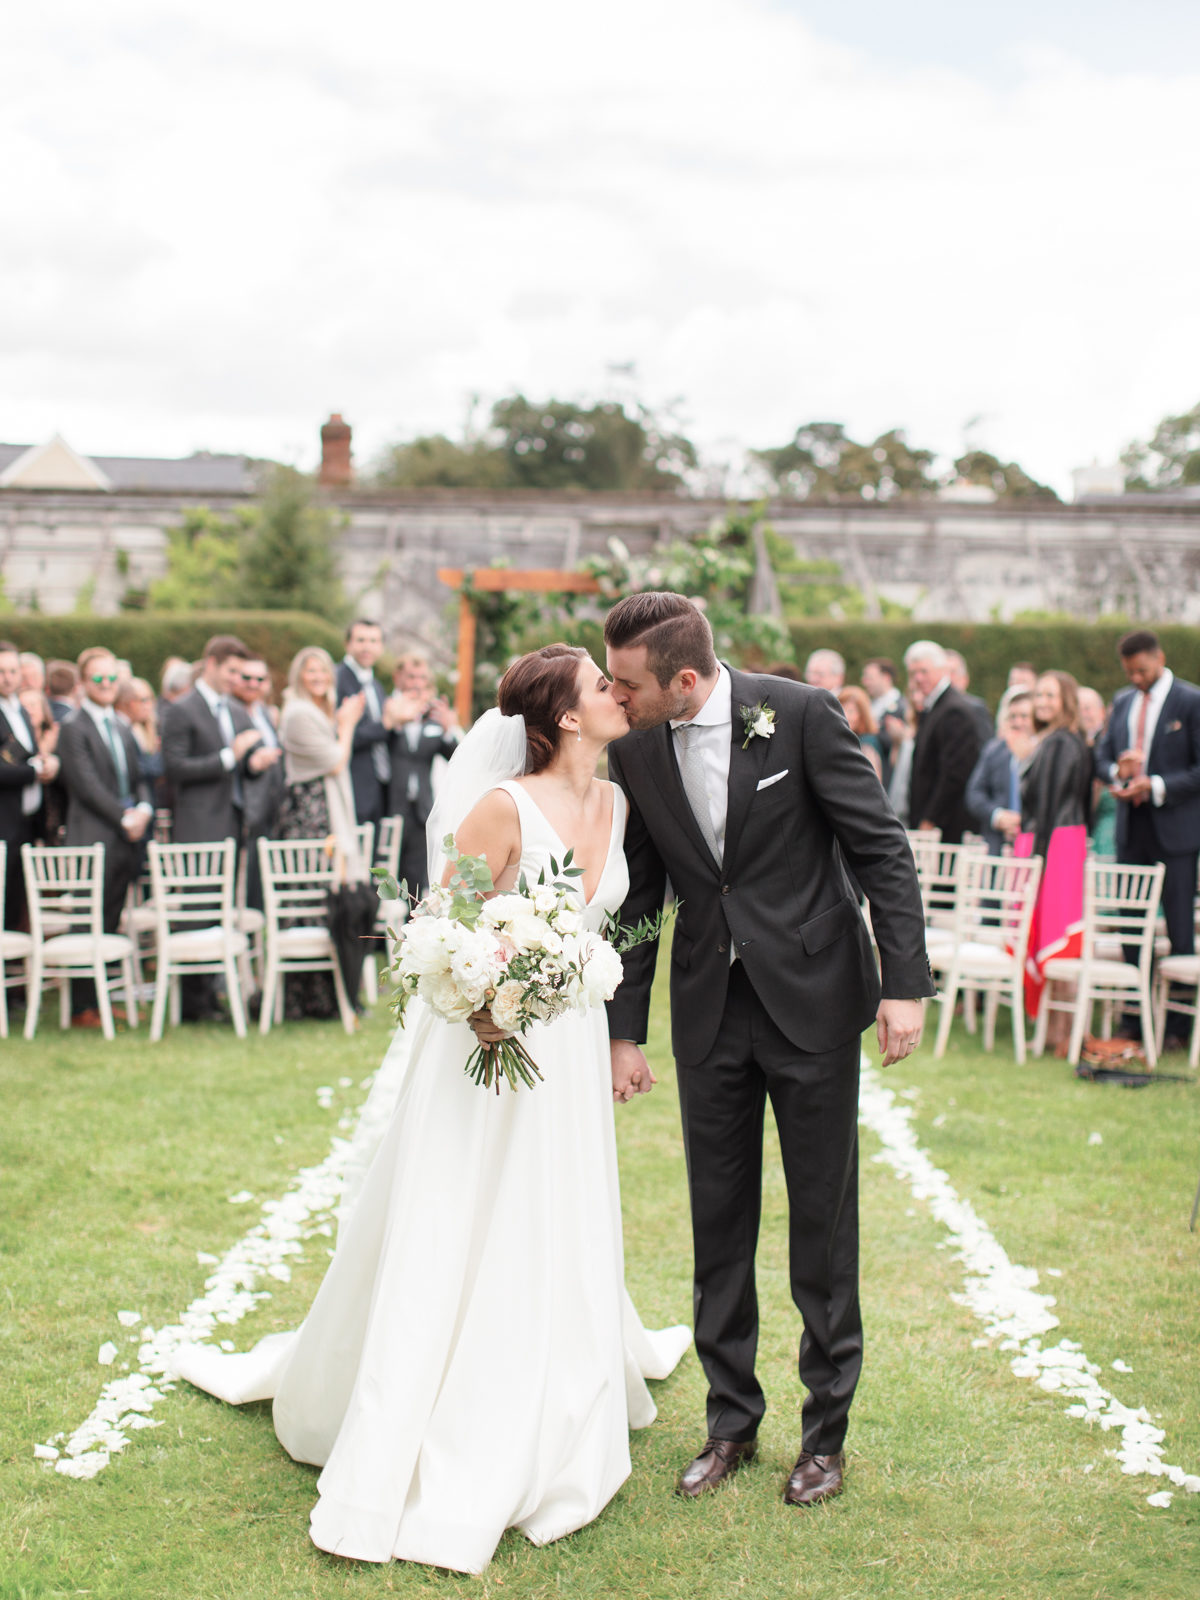 Ireland Film Photographer | Molly Carr Photography | Bride and Groom Kissing During Mount Juliet Estate Garden Wedding Ceremony